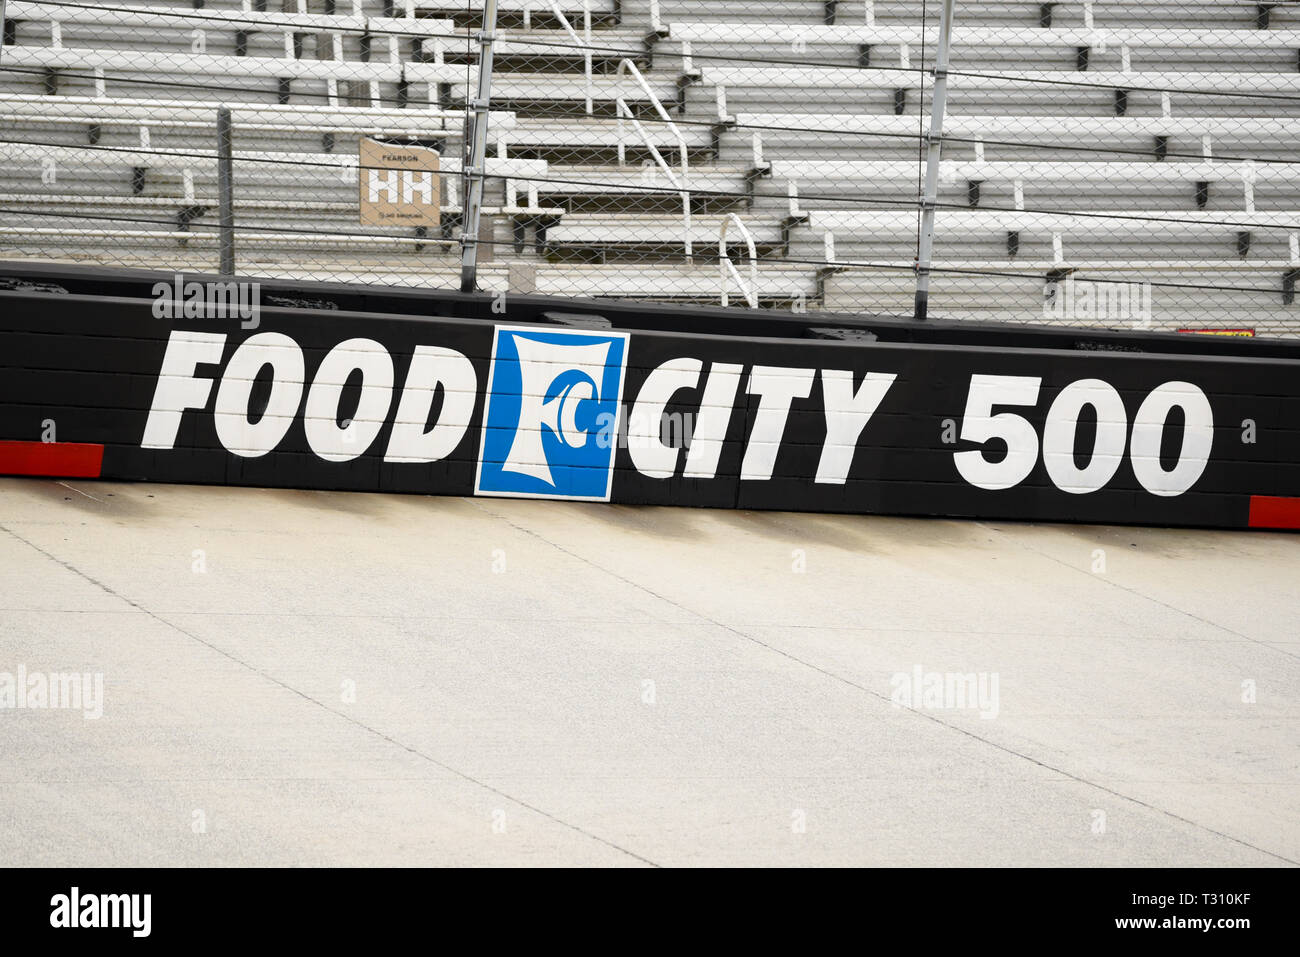 April 5, 2019 - Food City 500 Track Sign on April 5, 2019 at Bristol Motor Speedway in Bristol, Tennessee Credit: Ed Clemente/ZUMA Wire/Alamy Live News Stock Photo